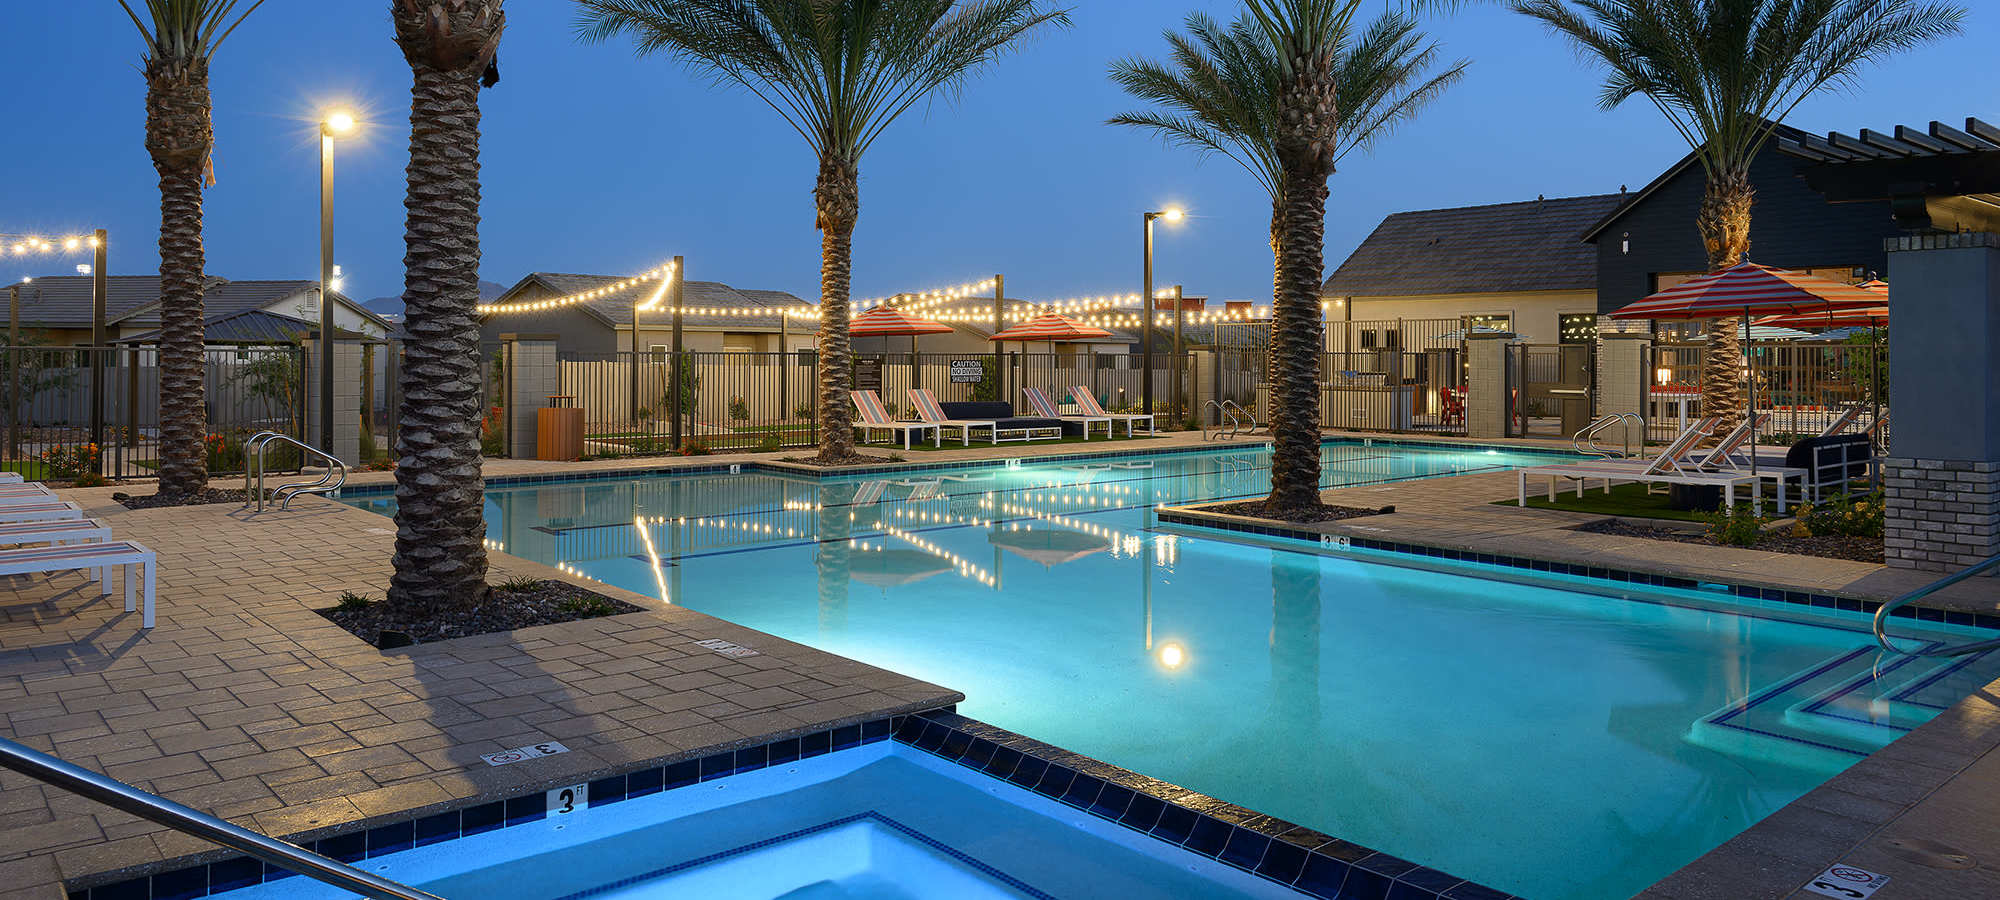 Resort Style Pool and Spa at FirstStreet Ballpark Village in Goodyear, Arizona